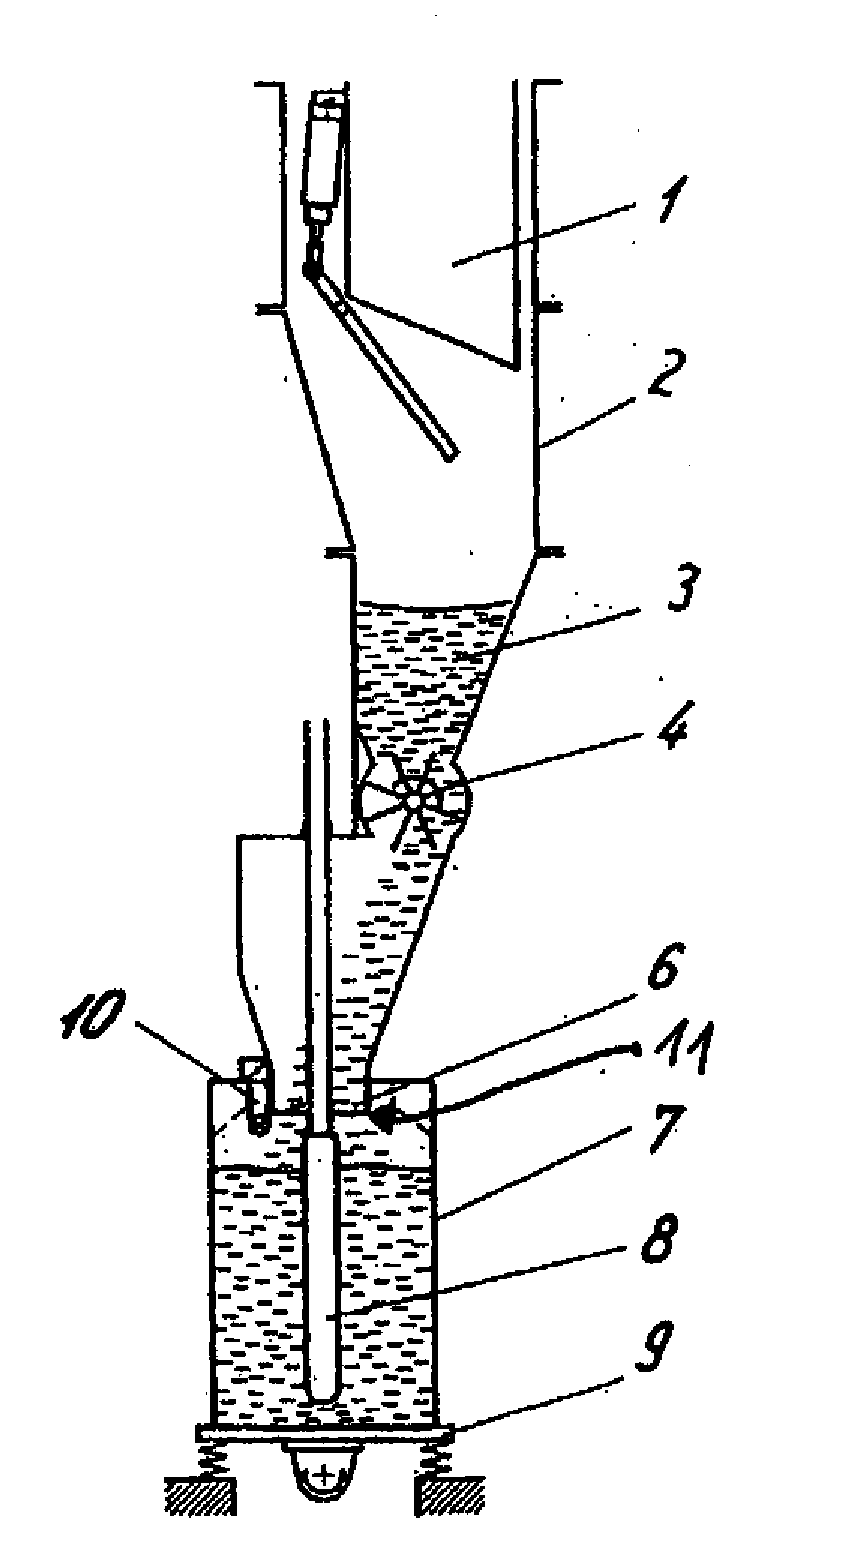 Method and Apparatus for Filling Open Containers with a Powdery Product